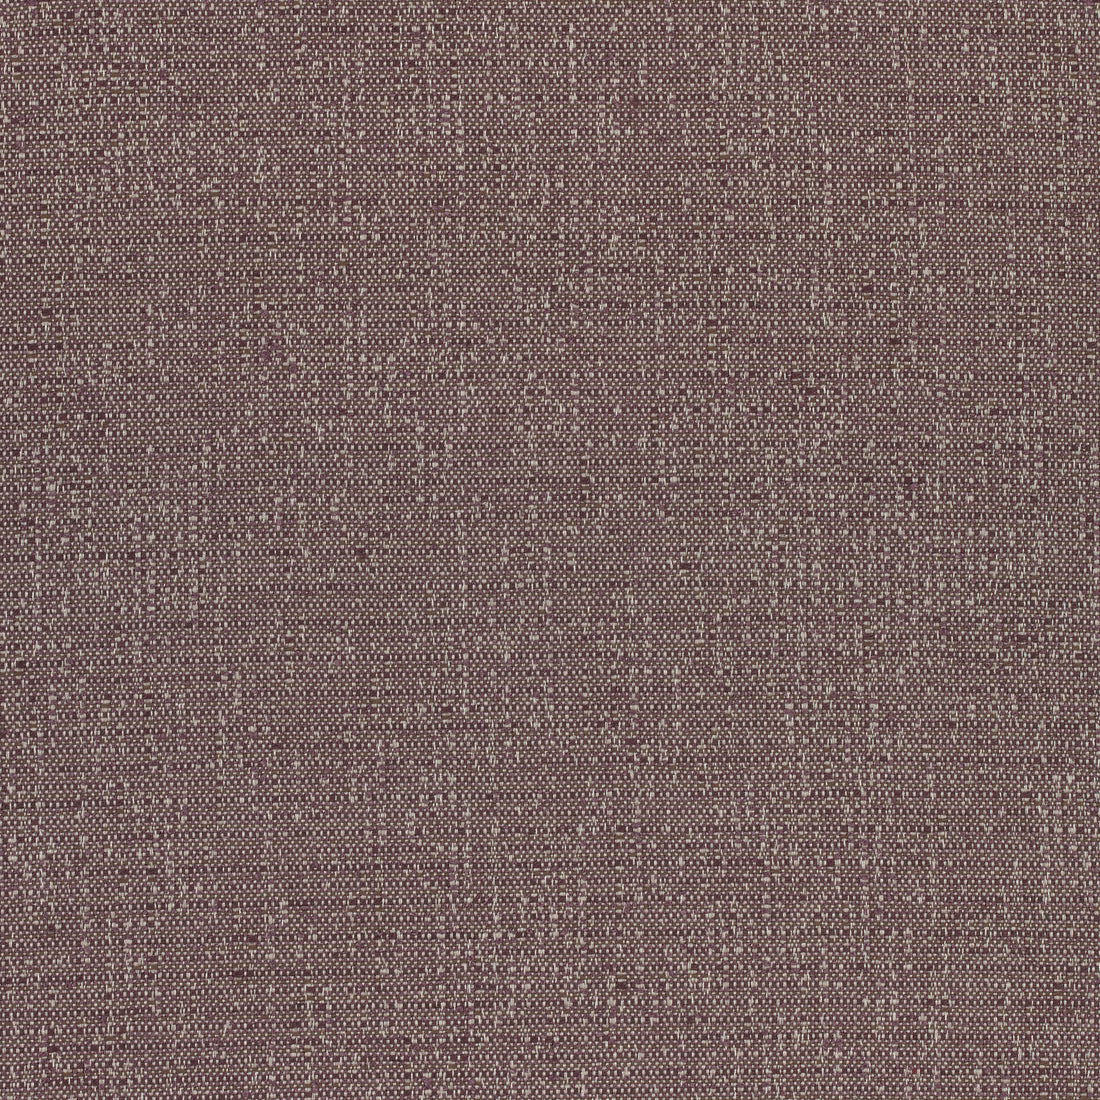 Everly fabric in plum color - pattern number W74060 - by Thibaut in the Cadence collection